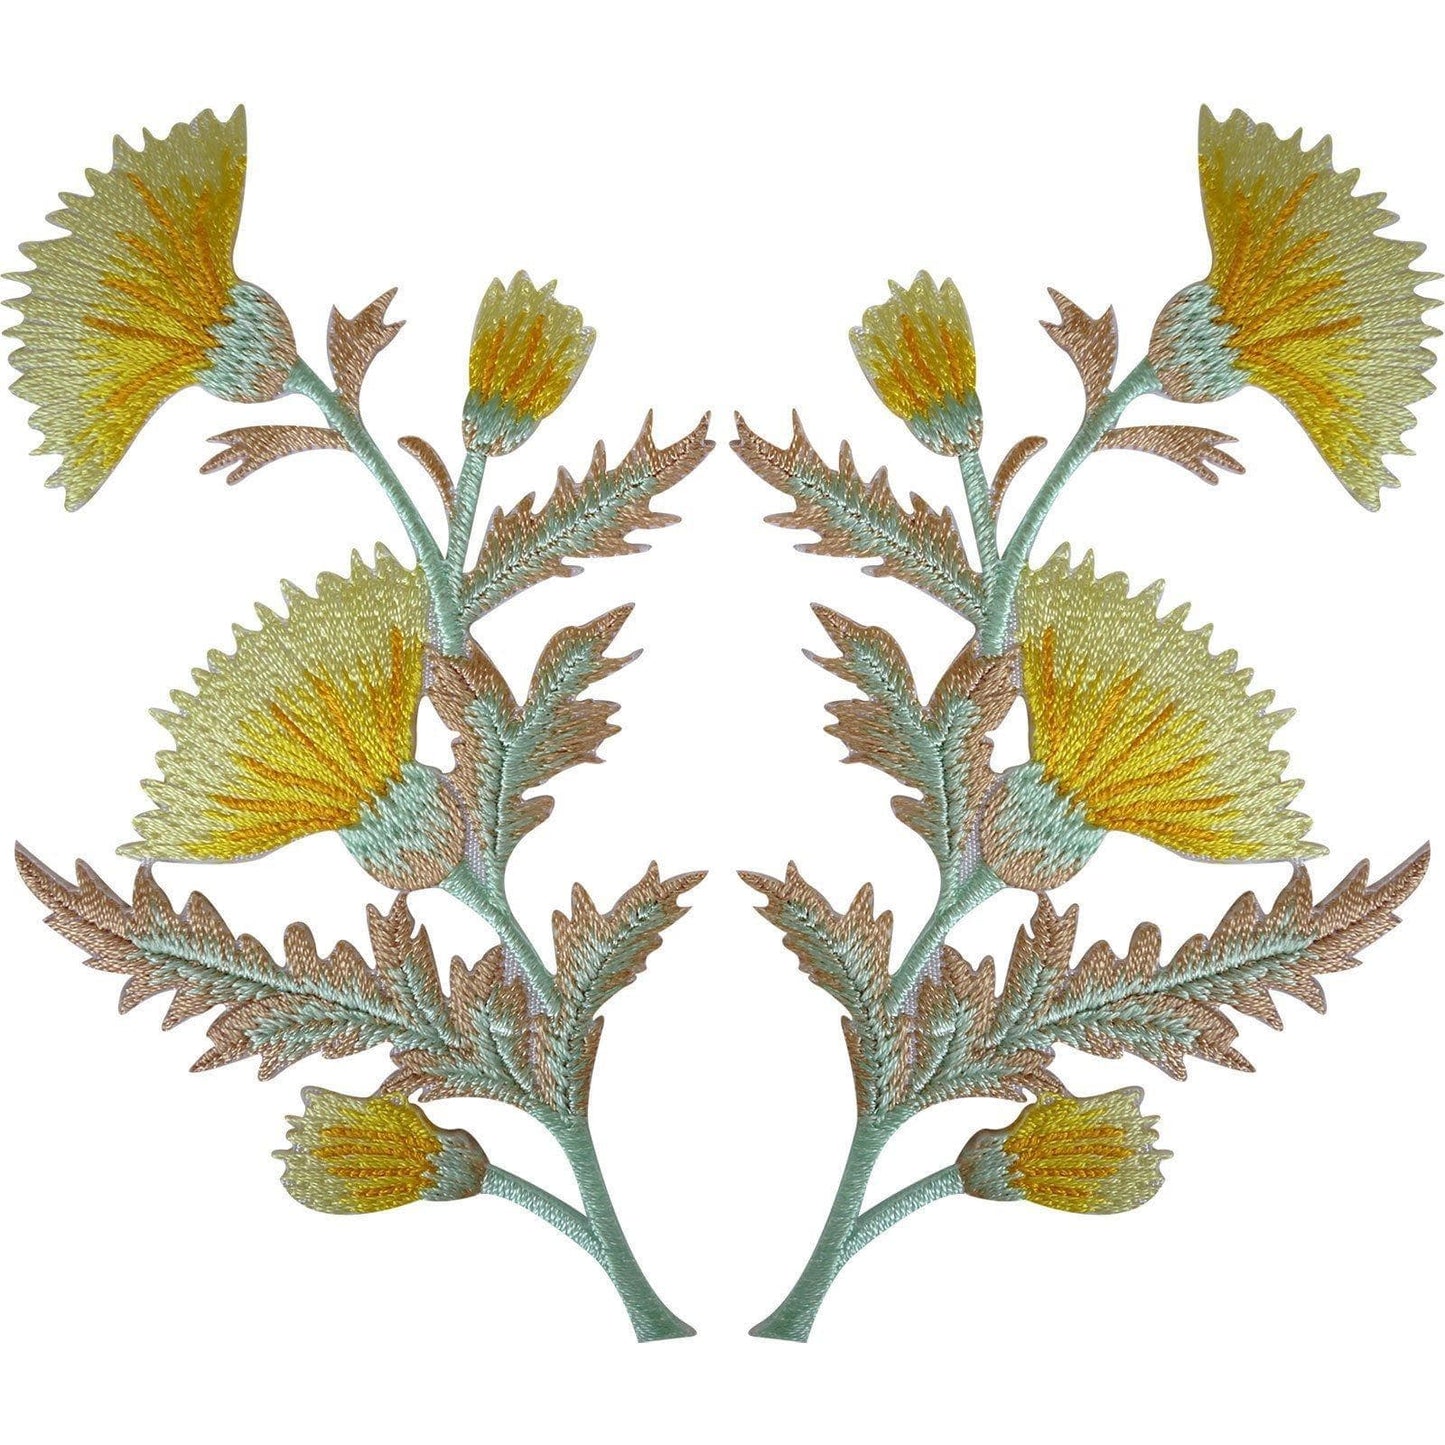 Pair of Yellow Thistle Flower Patches Iron Sew On Embroidery Patch Badge Flowers